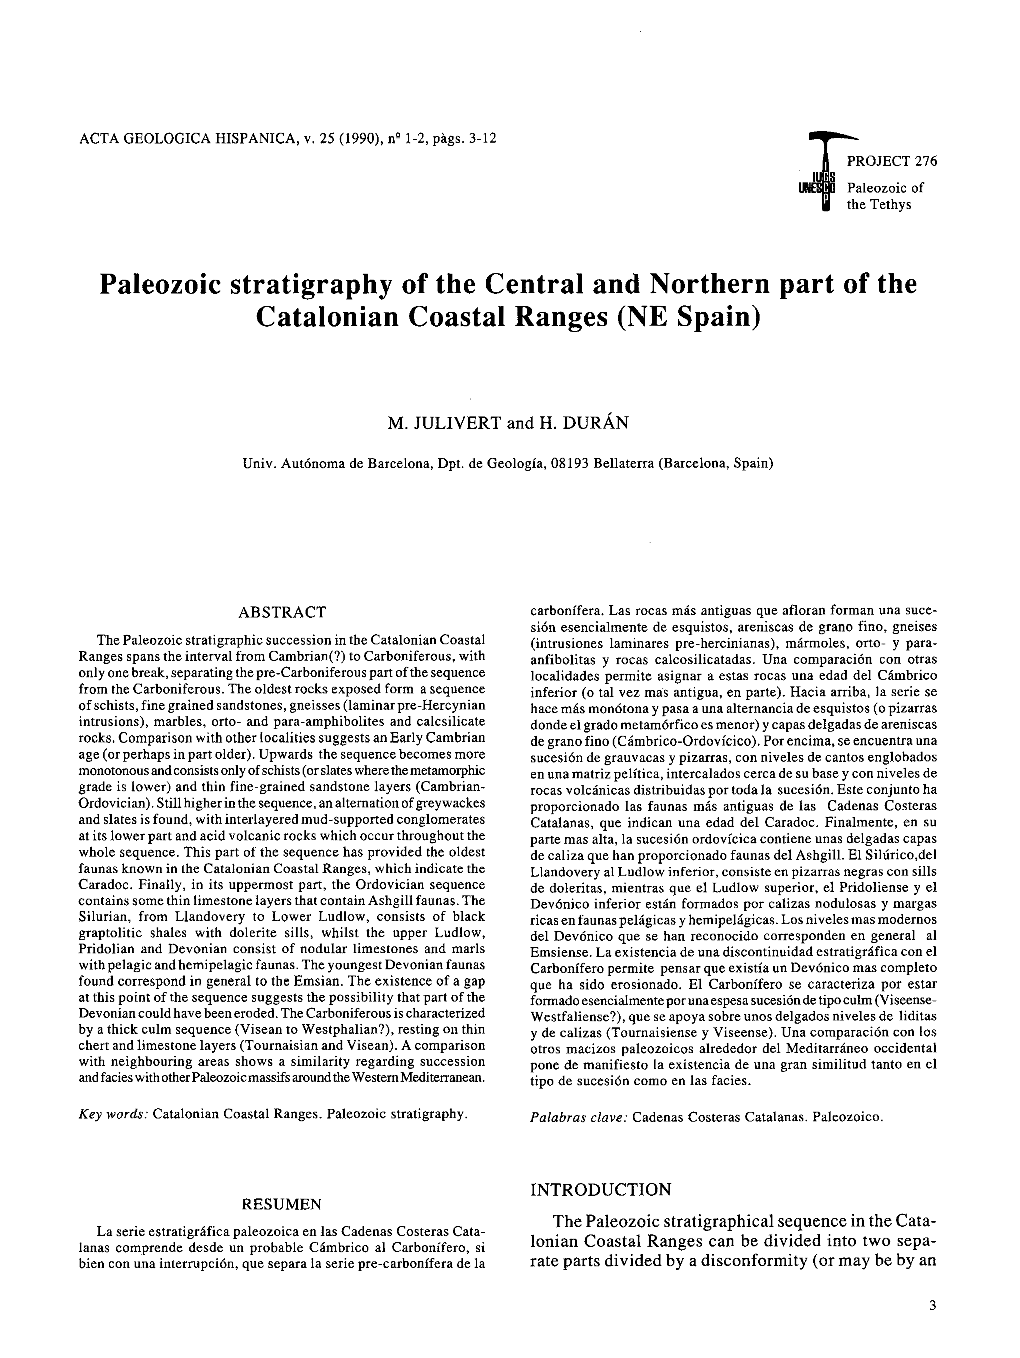 Paleozoic Stratigraphy of the Central and Northern Part of the Catalonian Coastal Ranges (NE Spain)